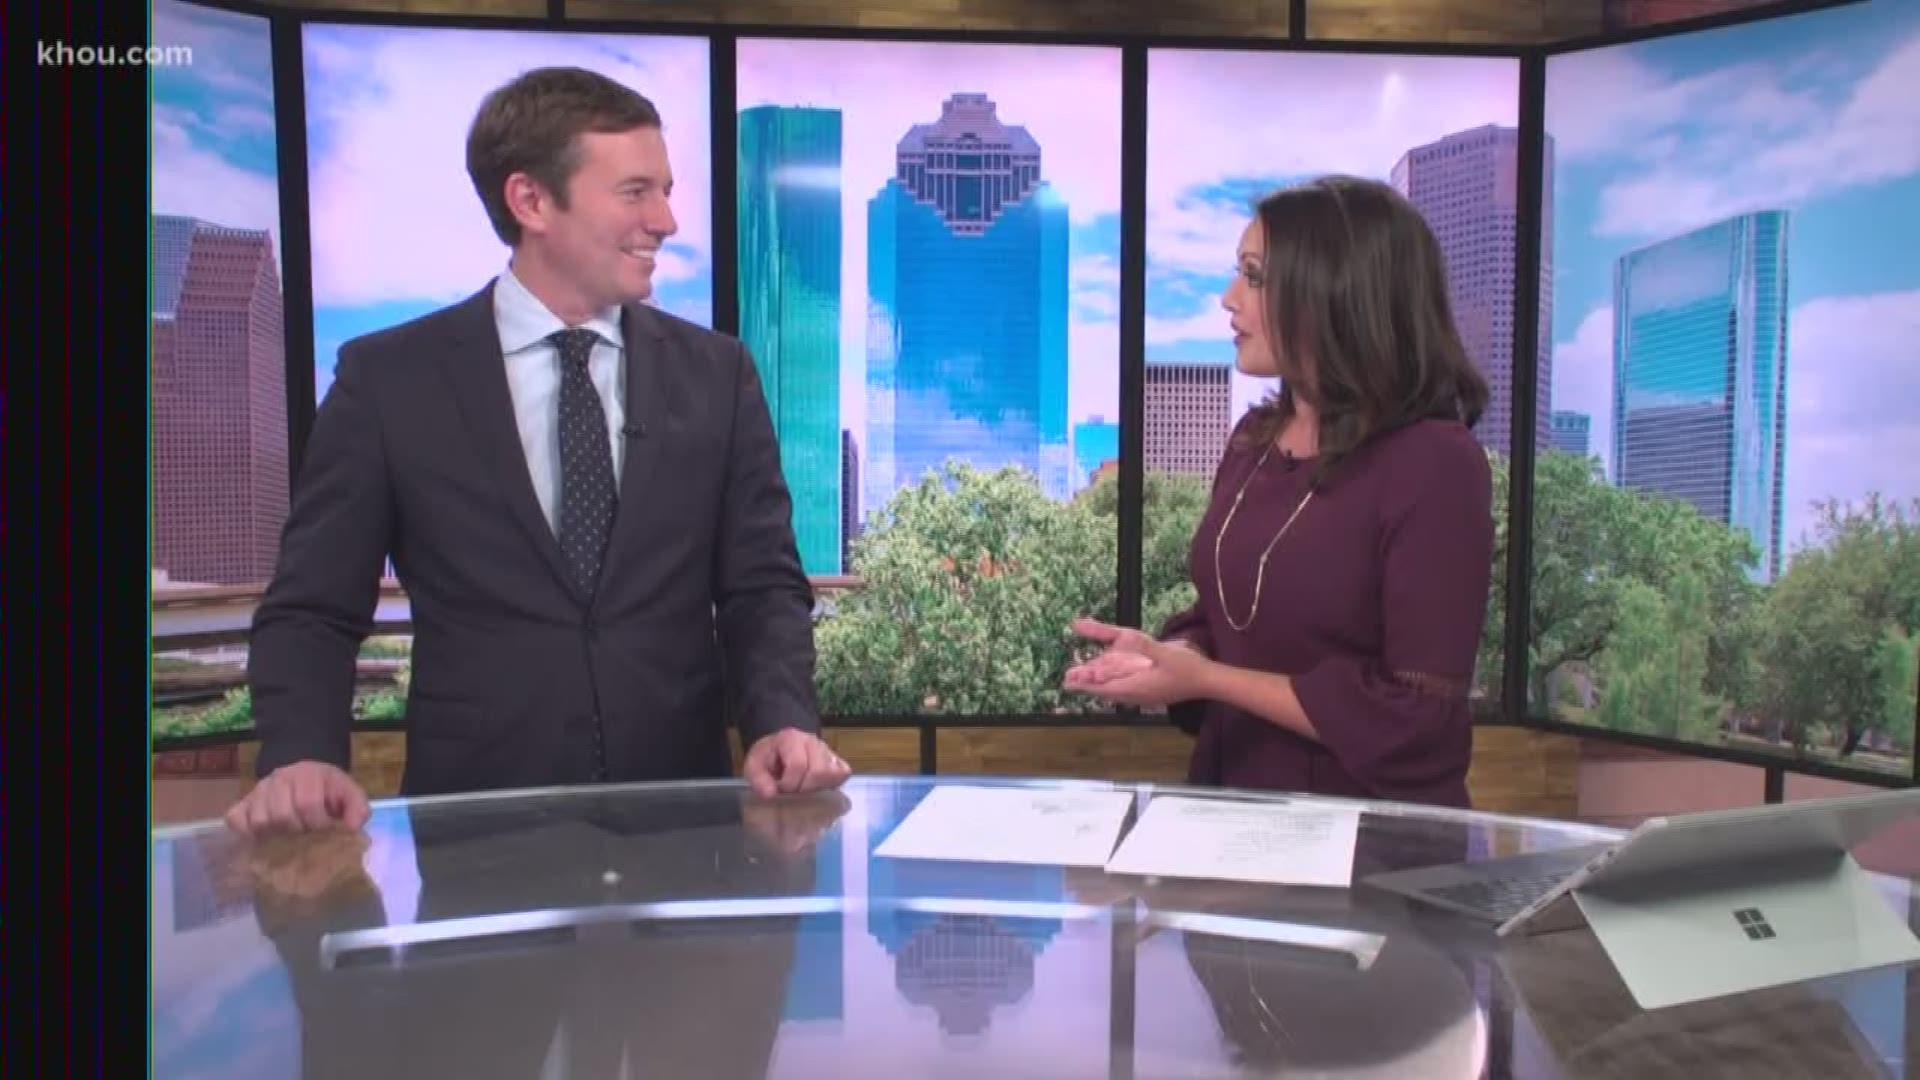 CBS News' anchor Jeff Glor is in the KHOU 11 studio with Rekha Muddaraj talking about the Trump rally at the Toyota Center and midterm elections.